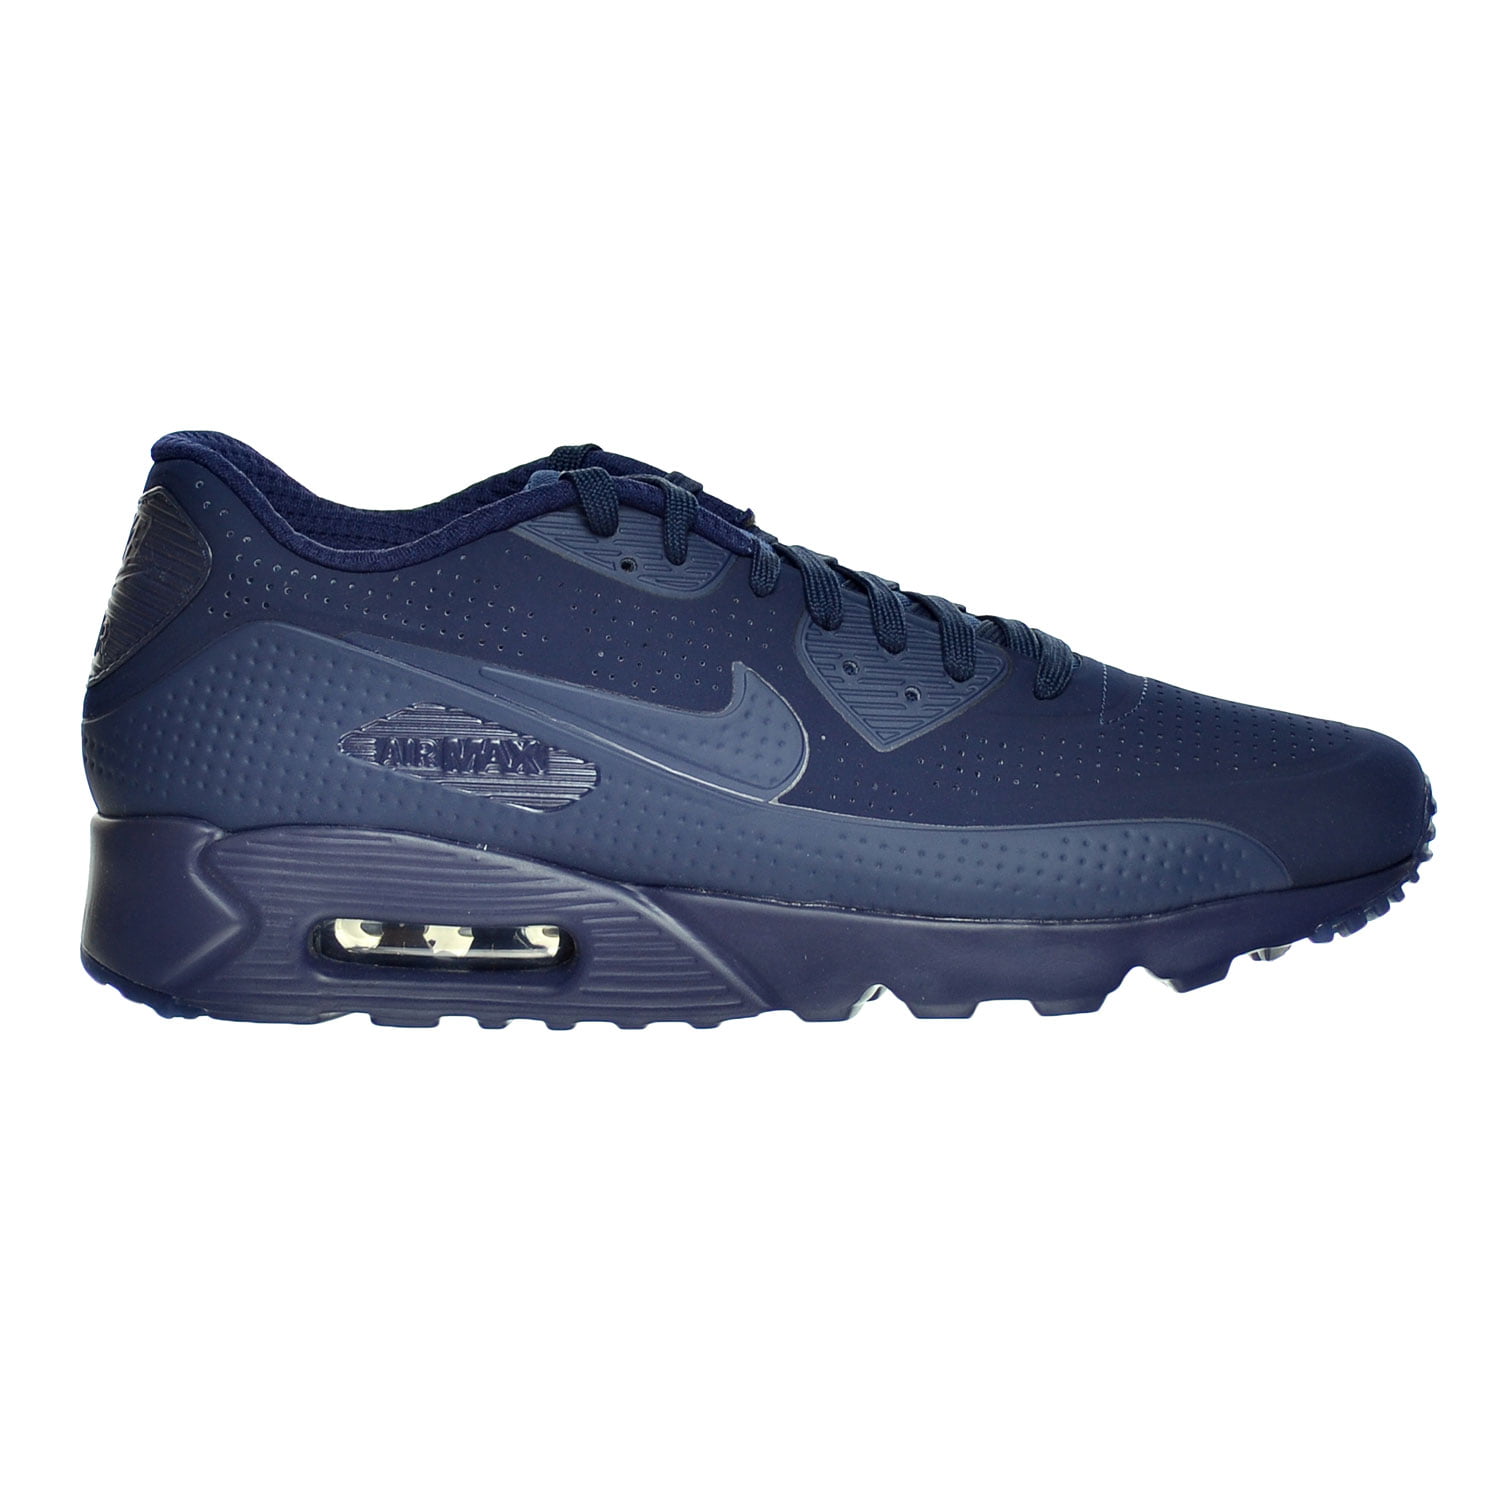 Air Max 90 Ultra Moire Shoes Midnight Navy/White 819477-400 - Walmart.com